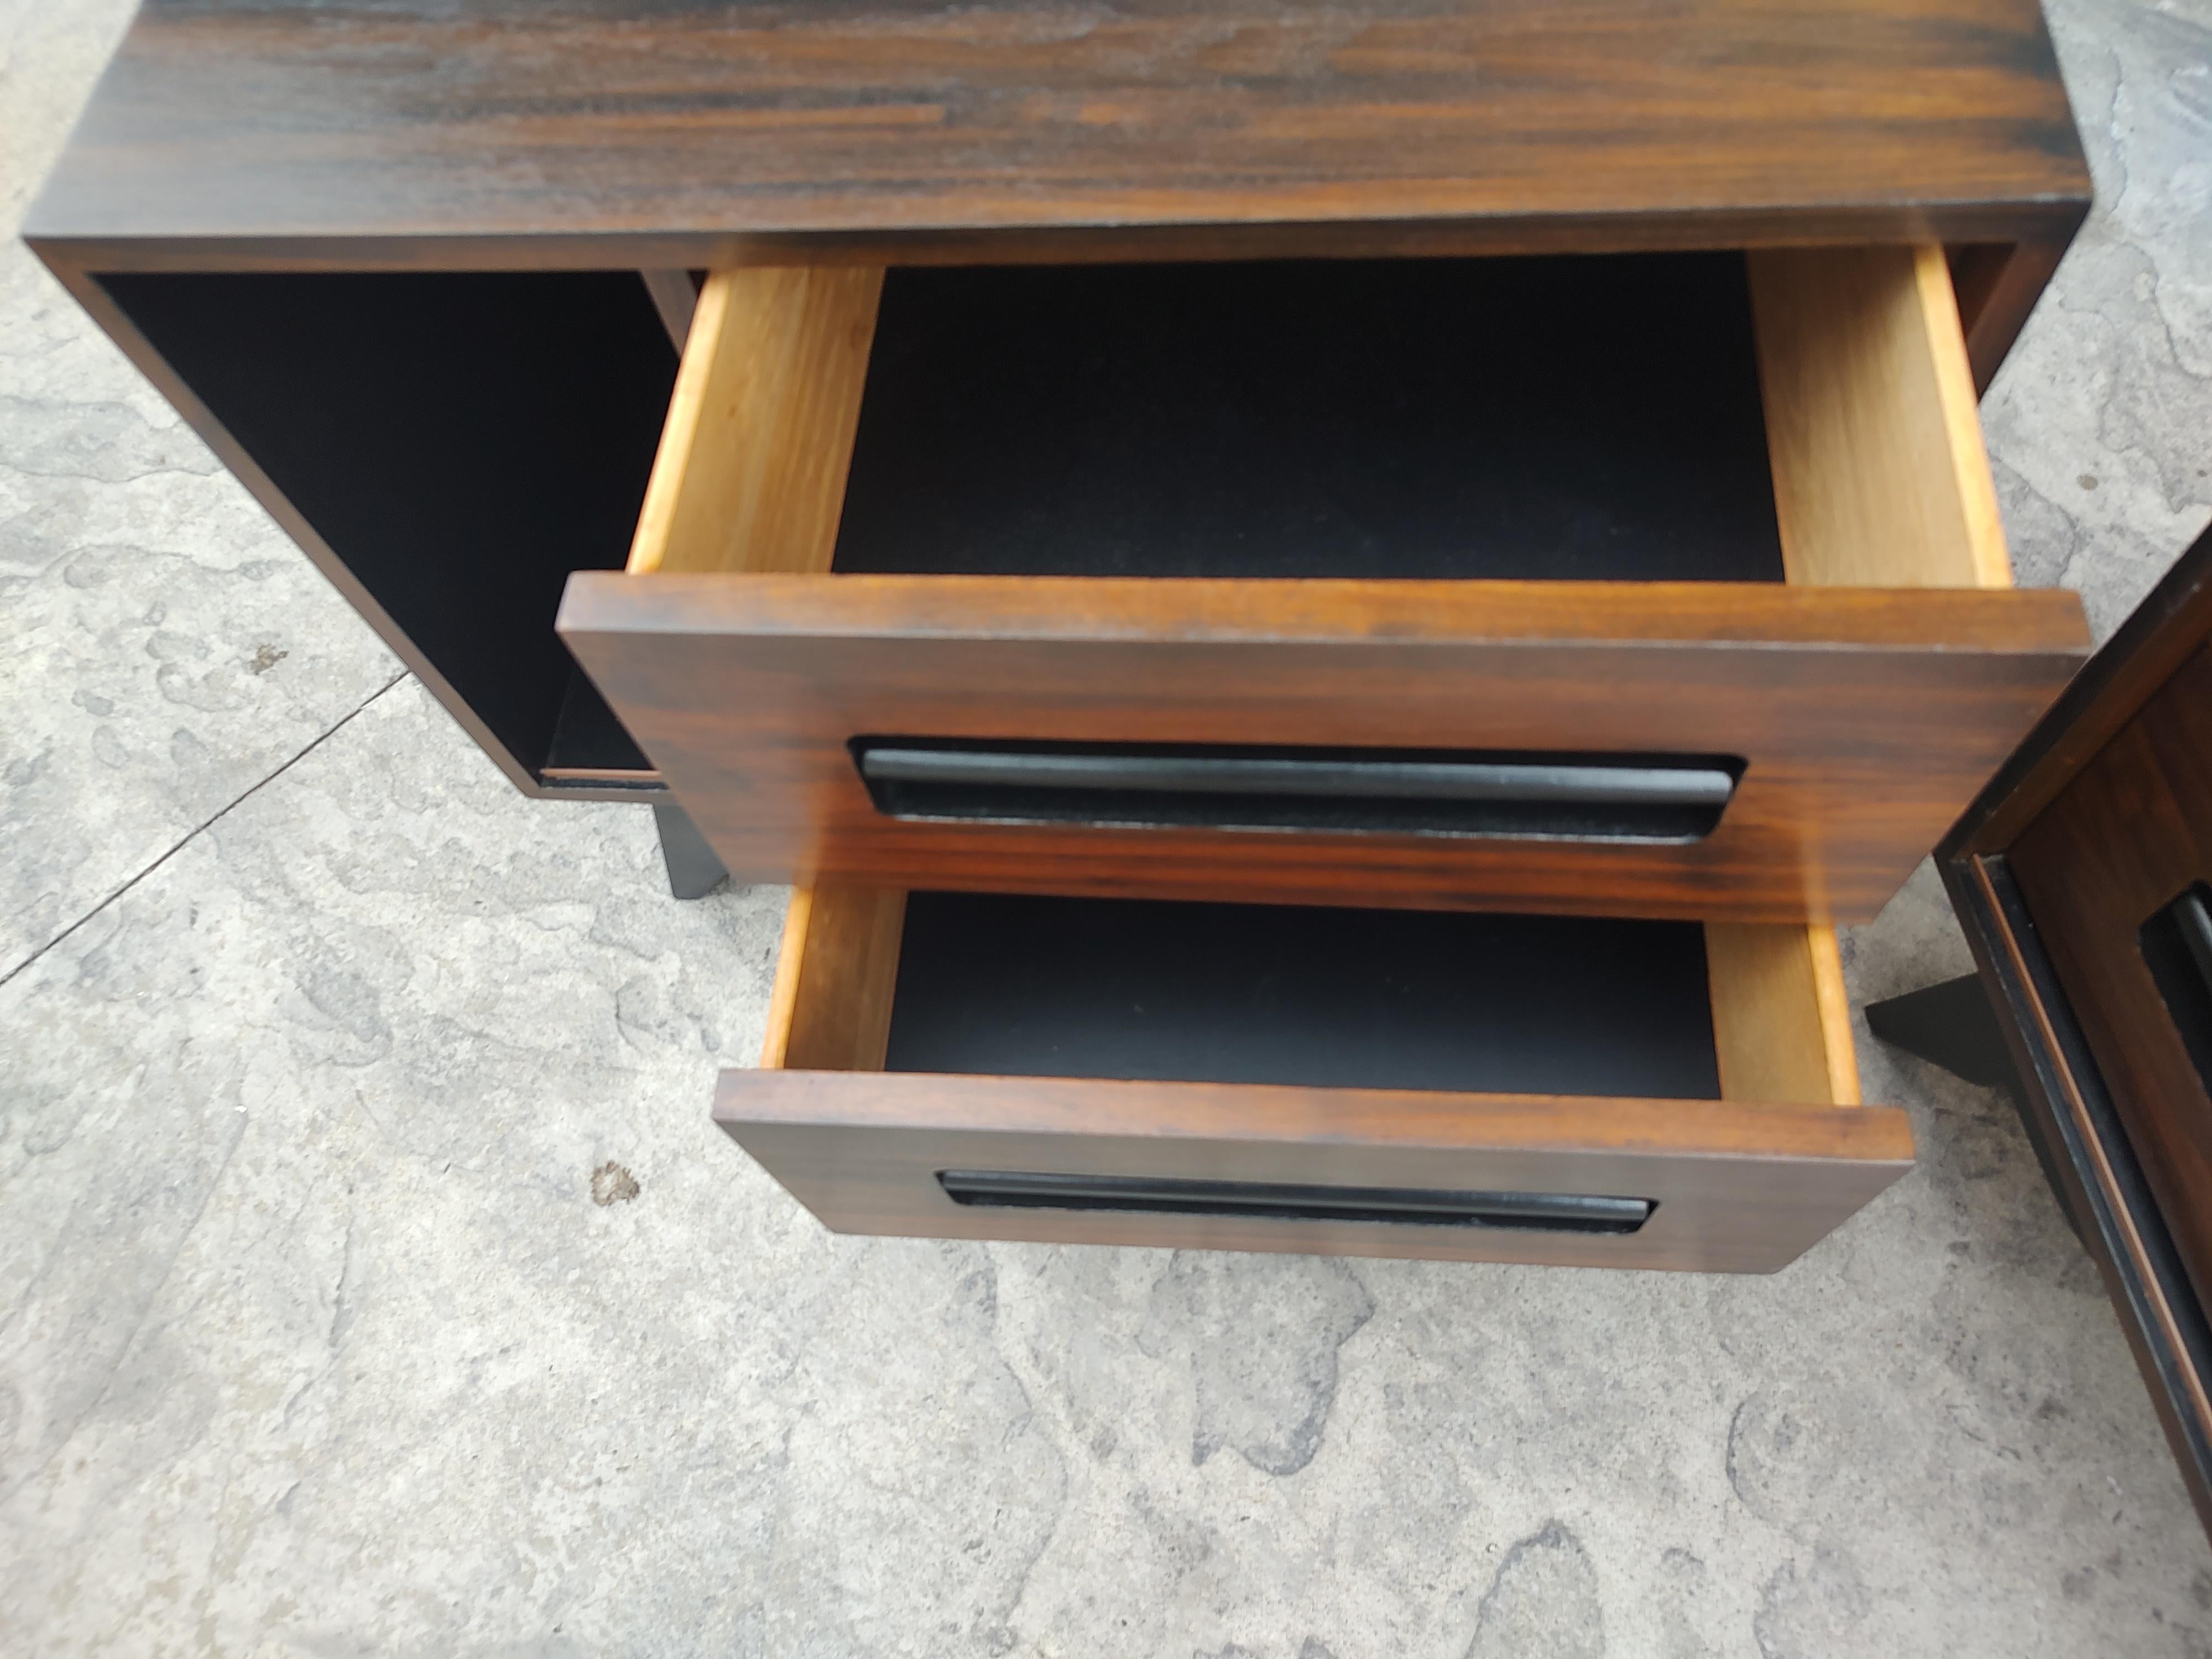 Pair of Mid-Century Modern Danish Rosewood & Black Lacquer Nightstands C1970 For Sale 5